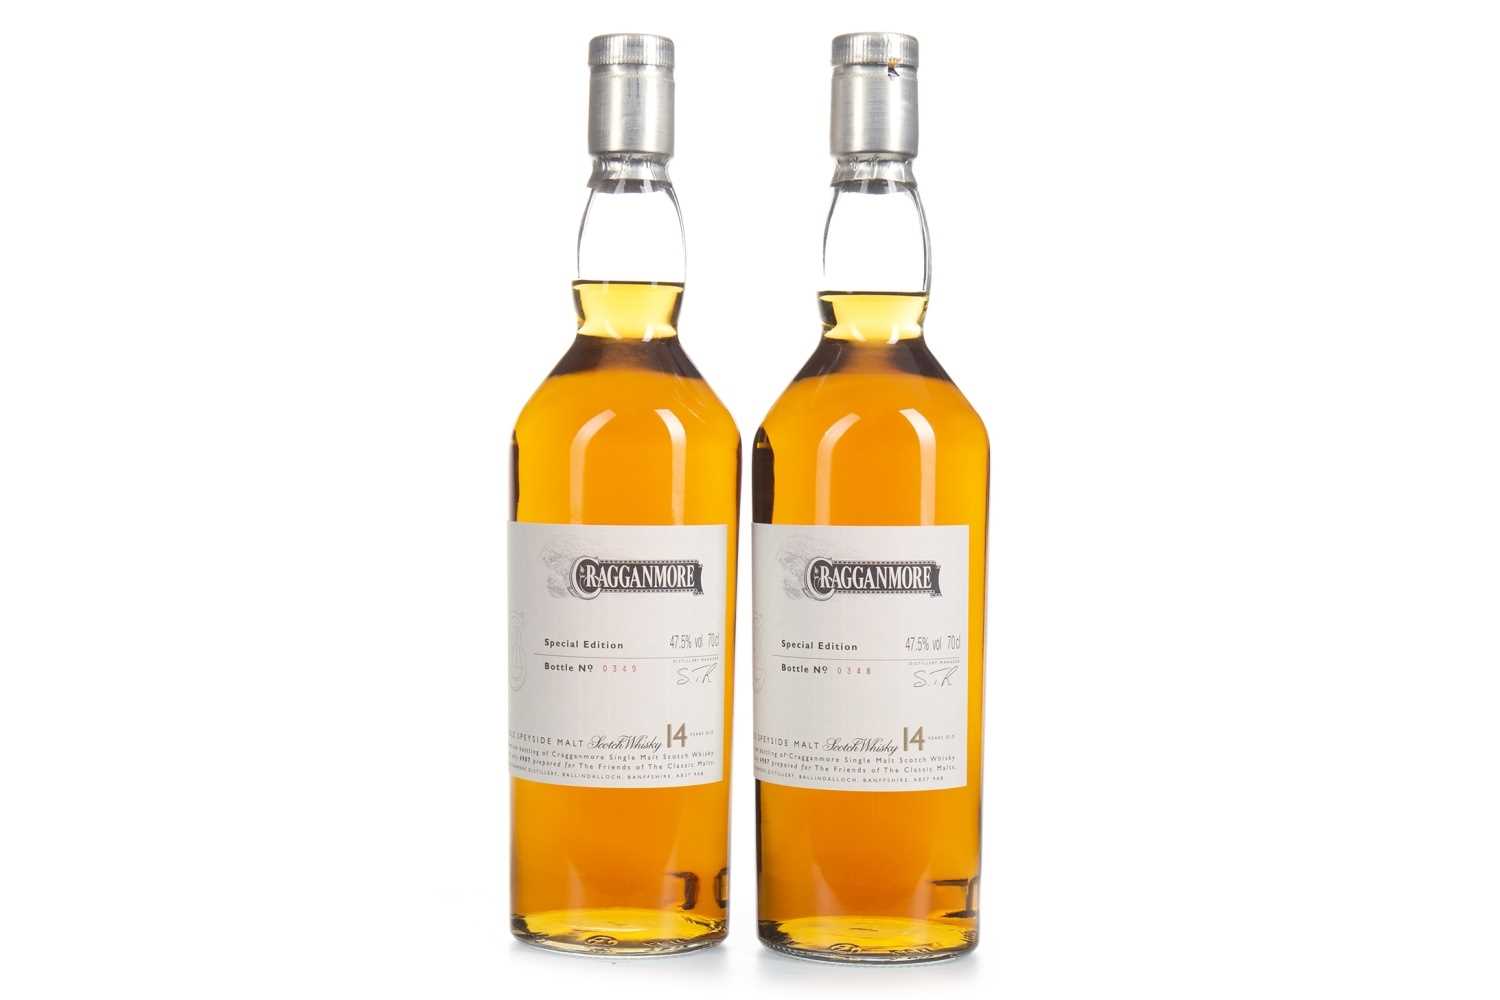 Lot 56 - TWO BOTTLES OF CRAGGANMORE FRIENDS OF THE CLASSIC MALTS AGED 14 YEARS